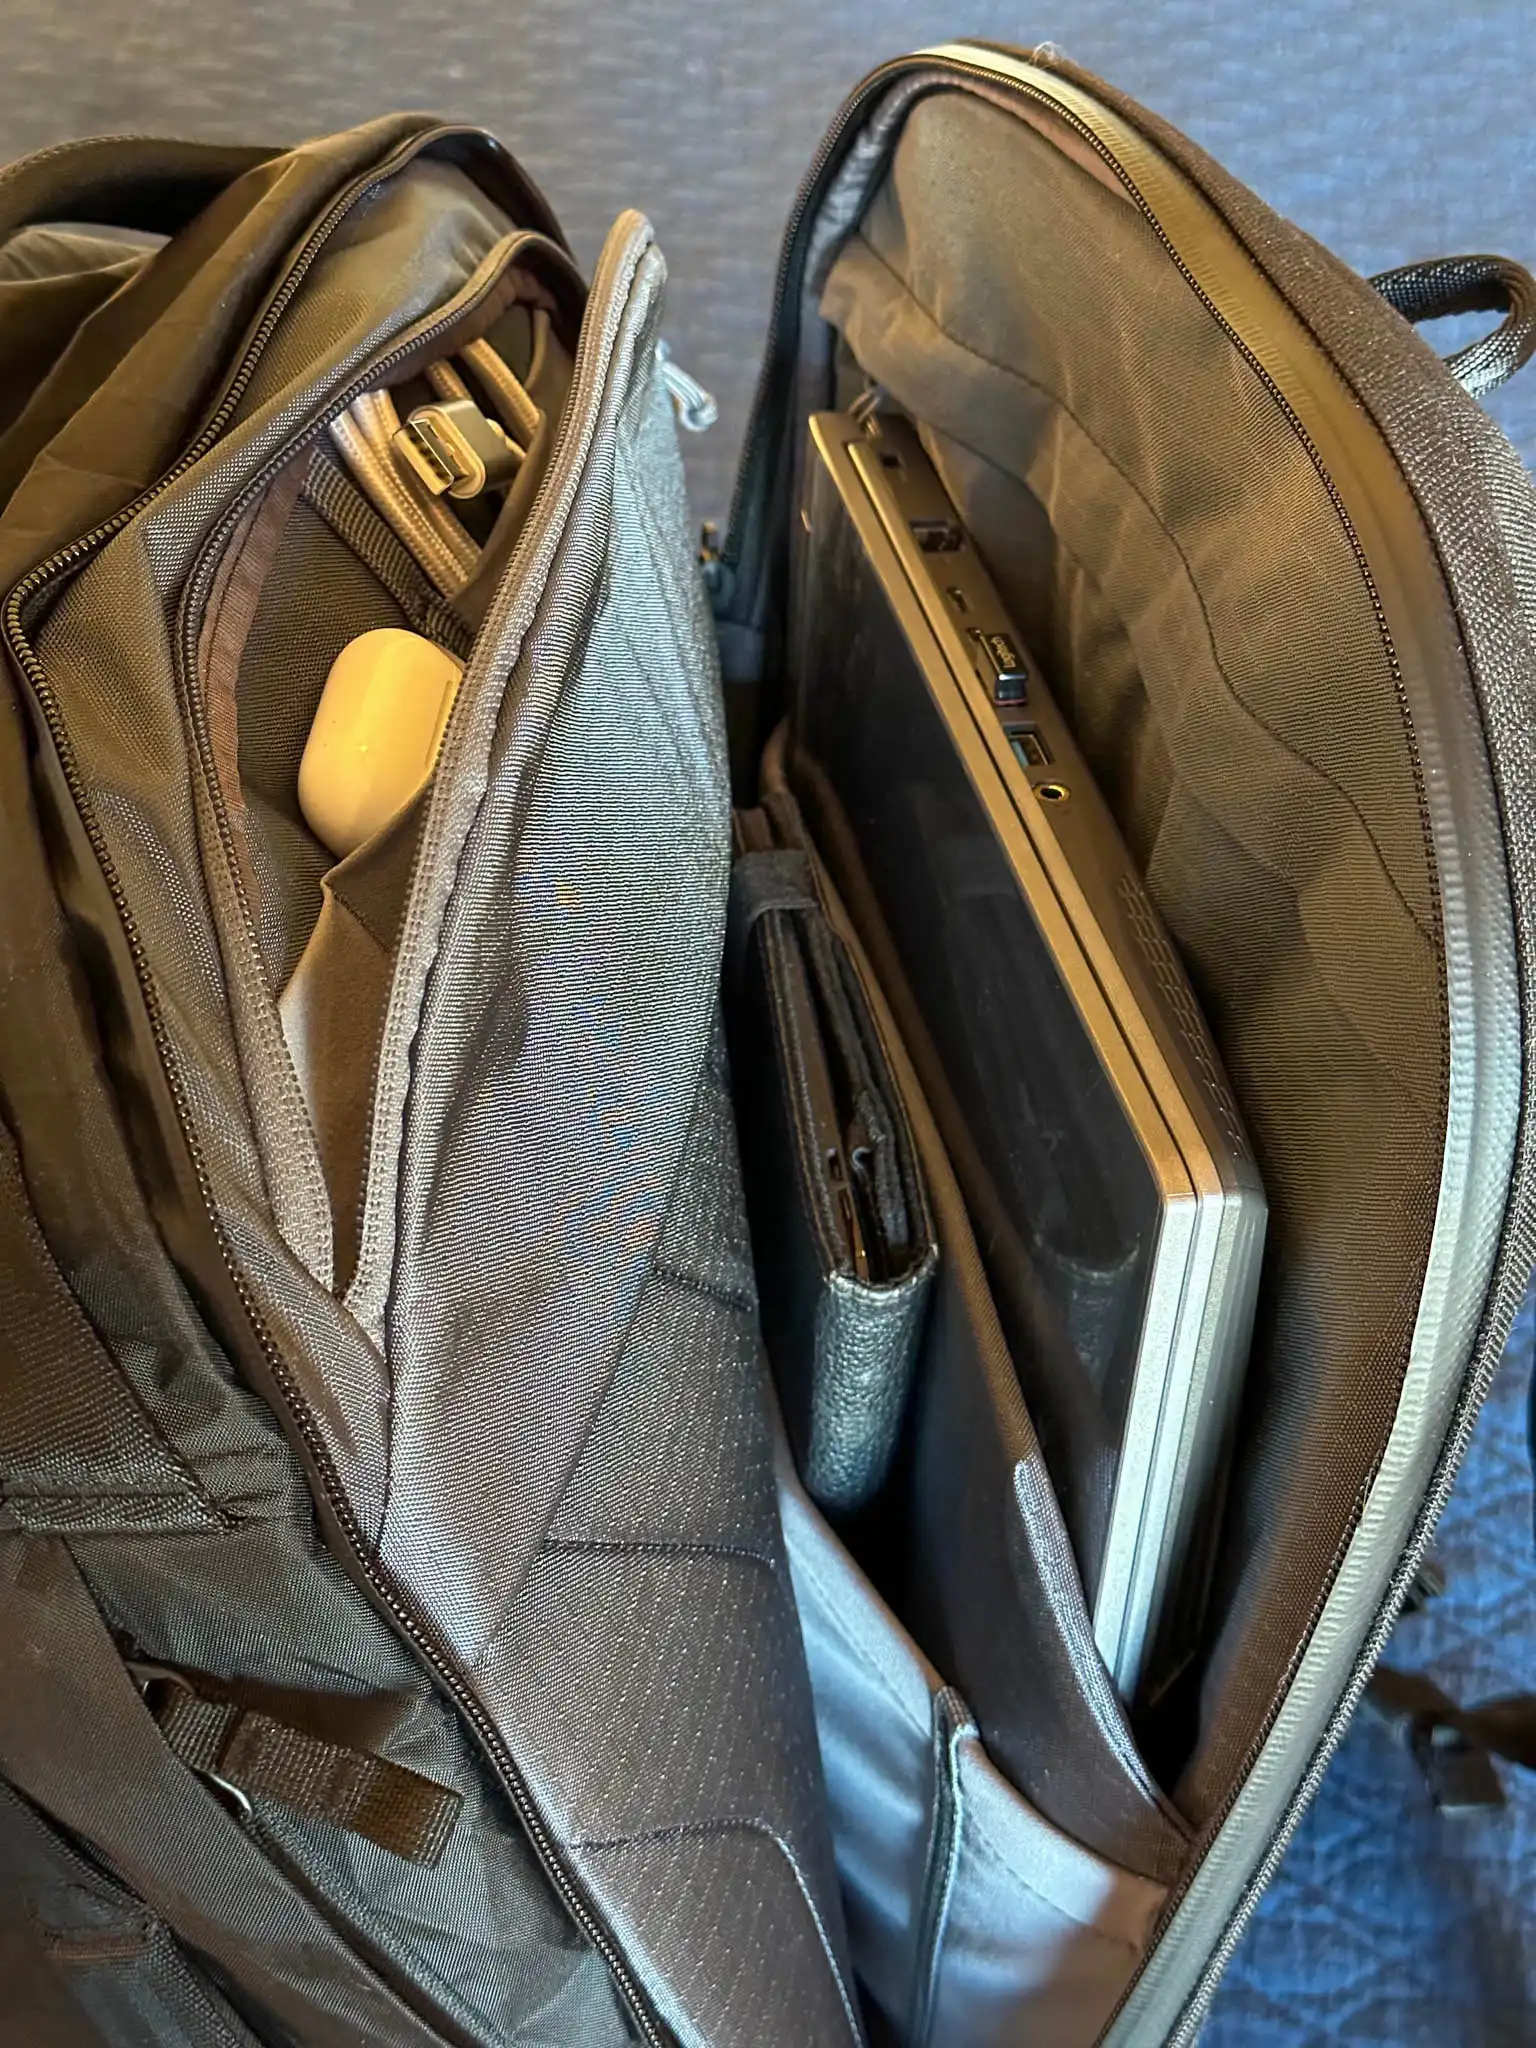 The laptop compartment on the Able Carry Max